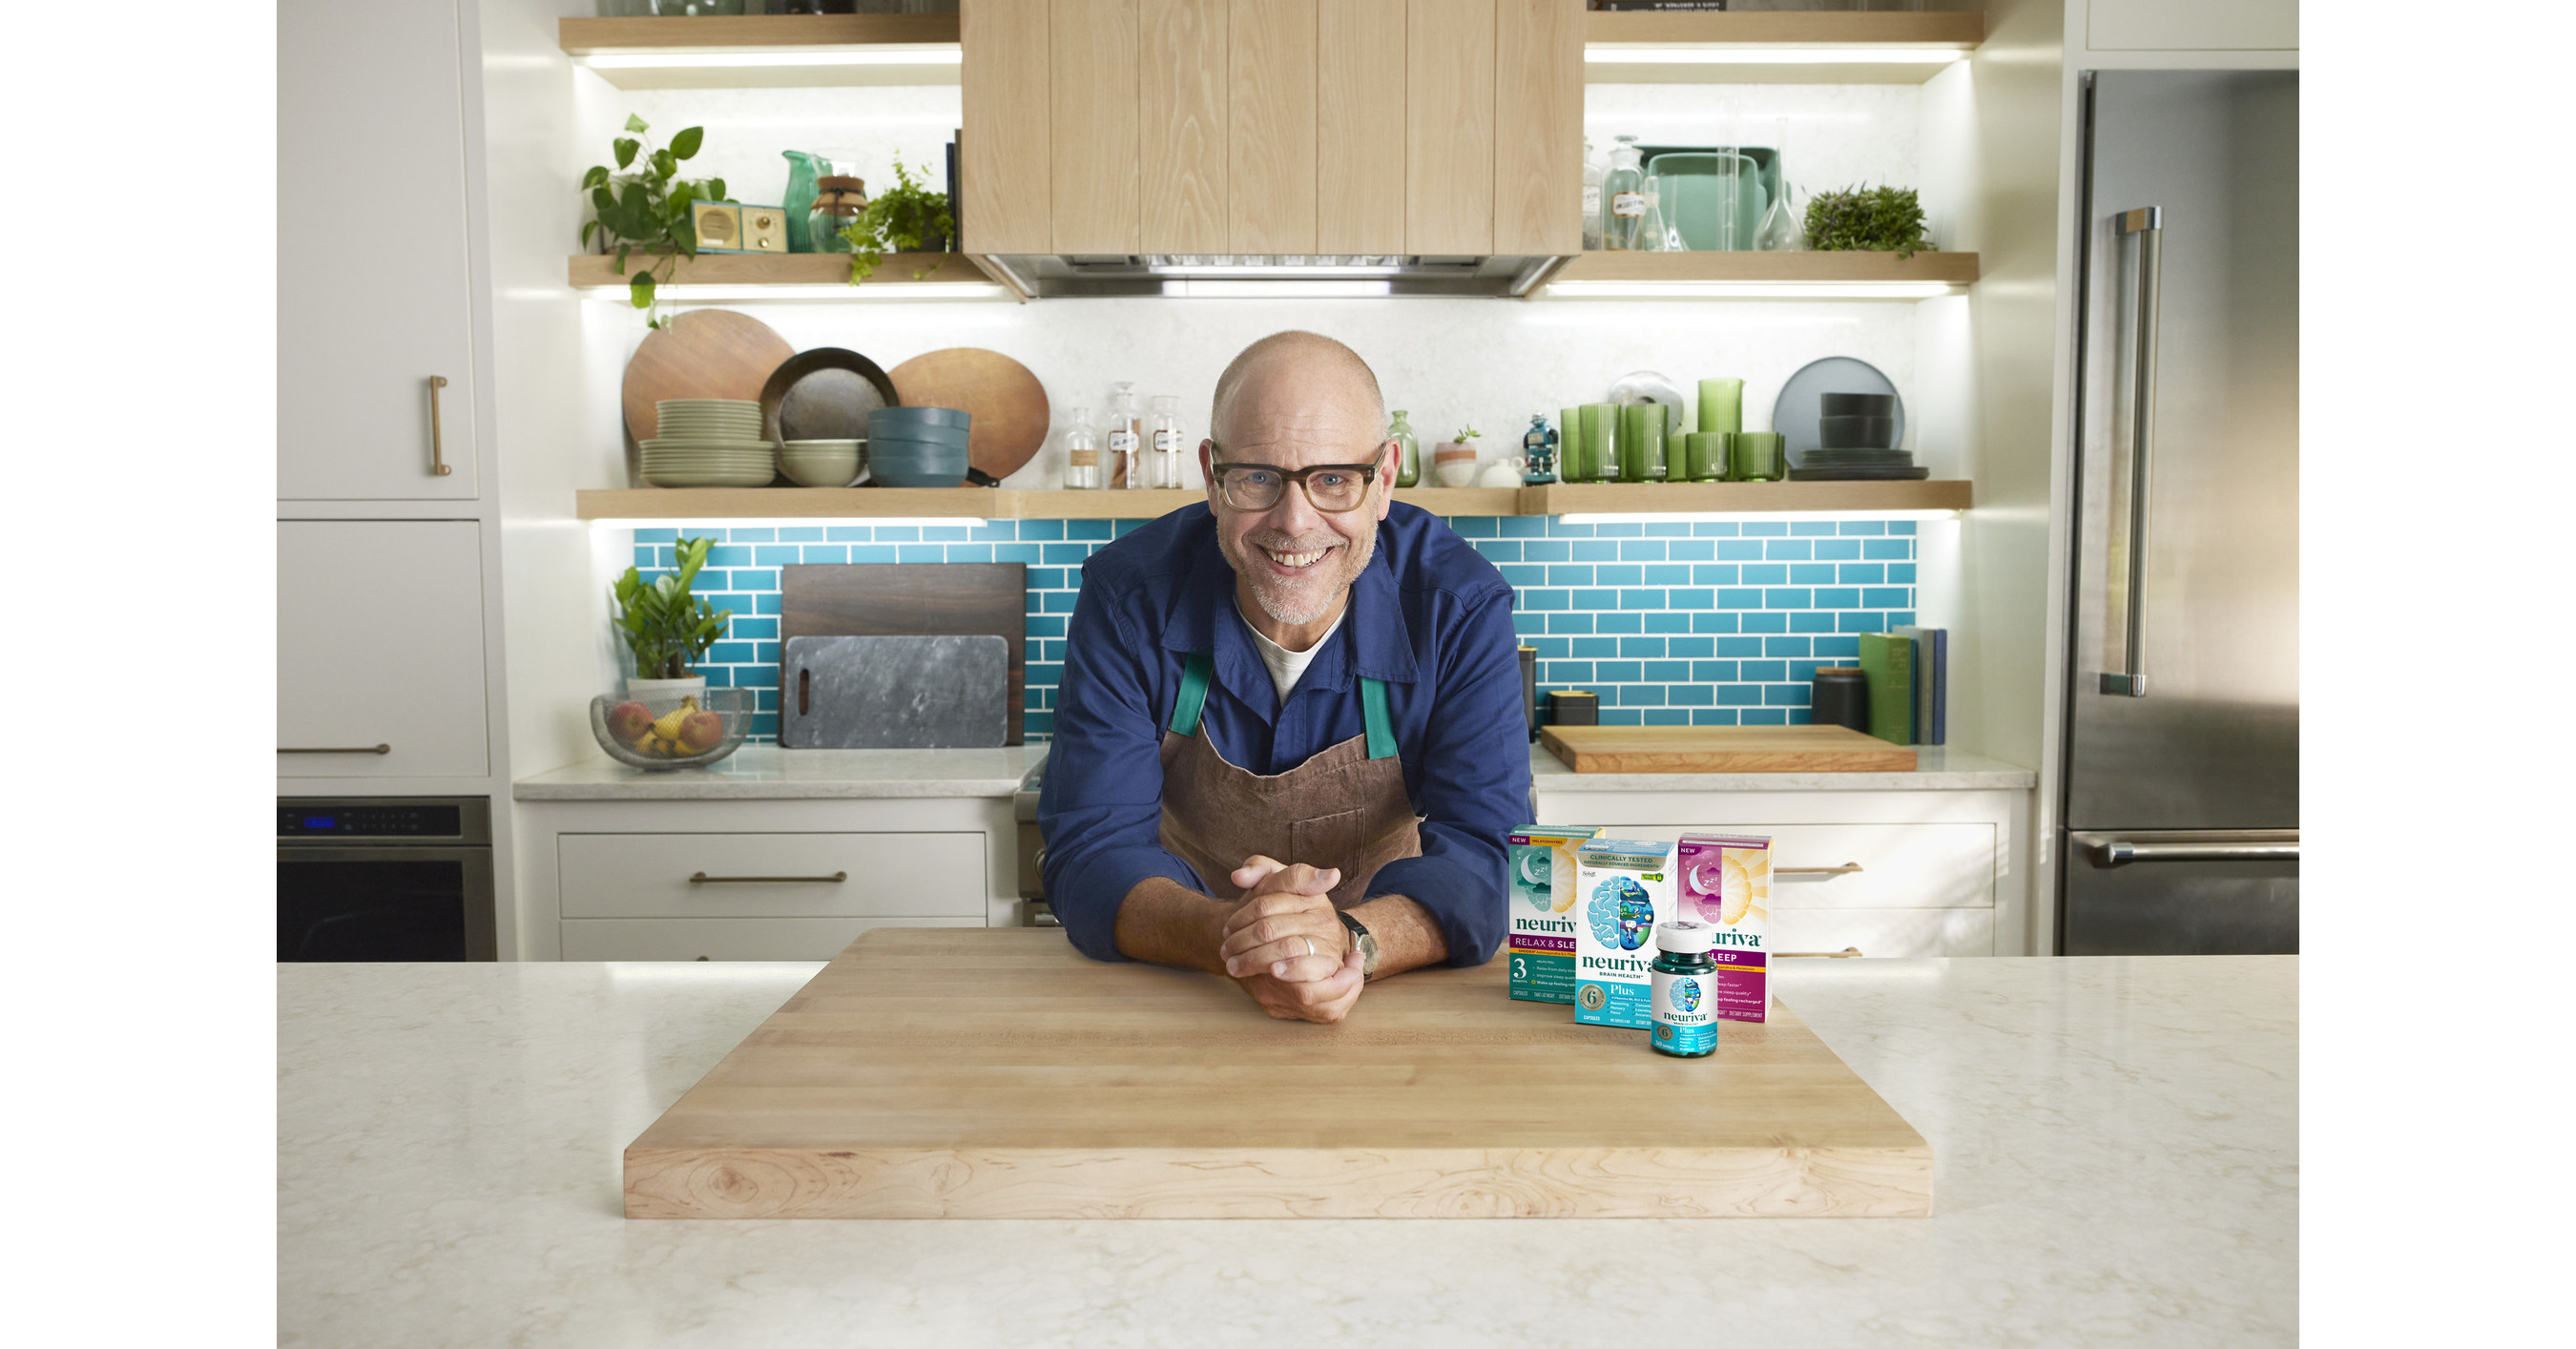 NEURIVA ® PARTNERS WITH ALTON BROWN TO INSPIRE CONSUMERS TO THINK BIGGER